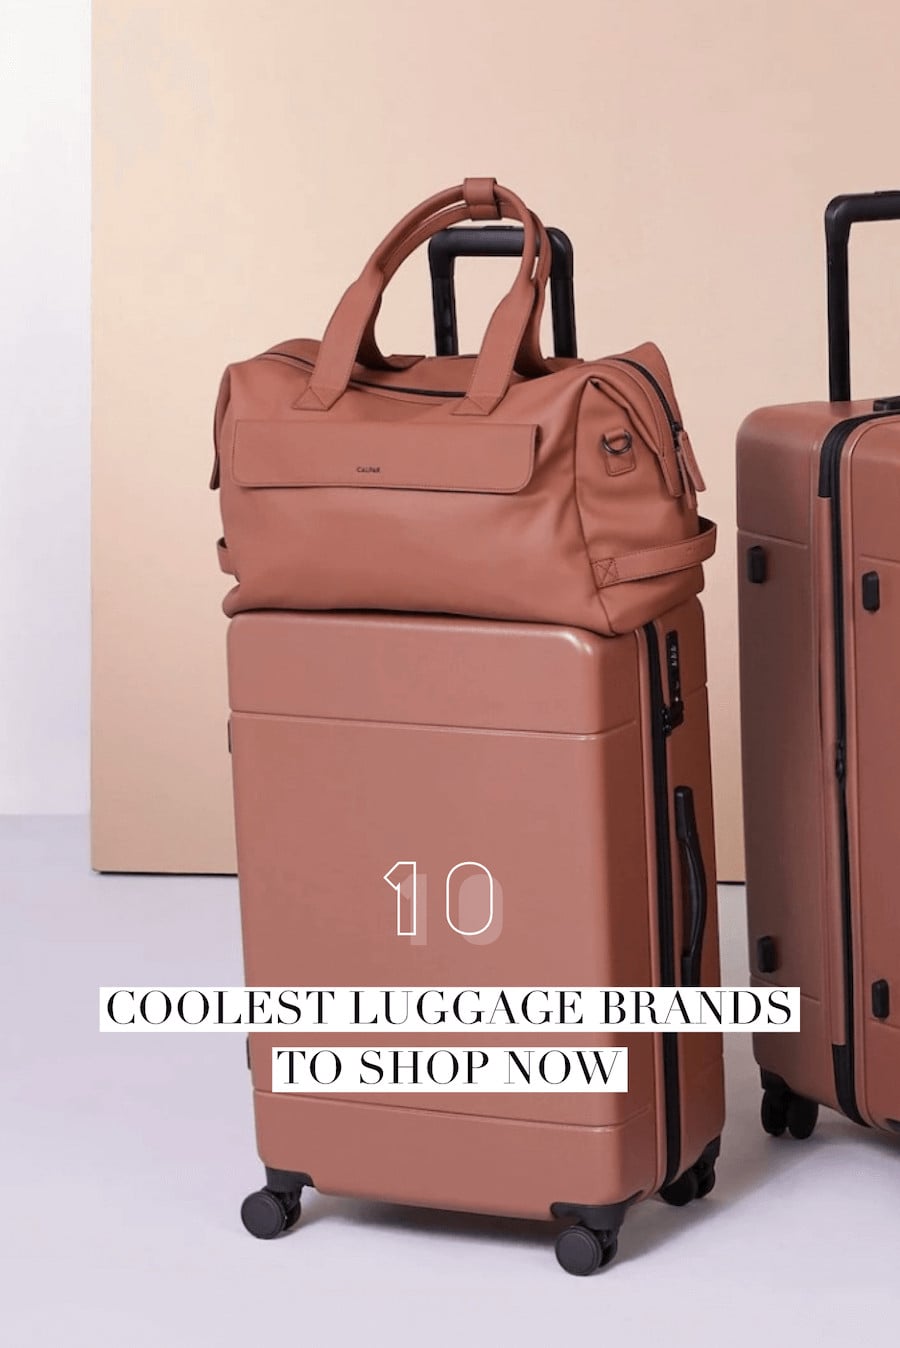 The Best Luggage Brands to Shop in 2023  Luggage bags travel, Best luggage  brands, Stylish luggage